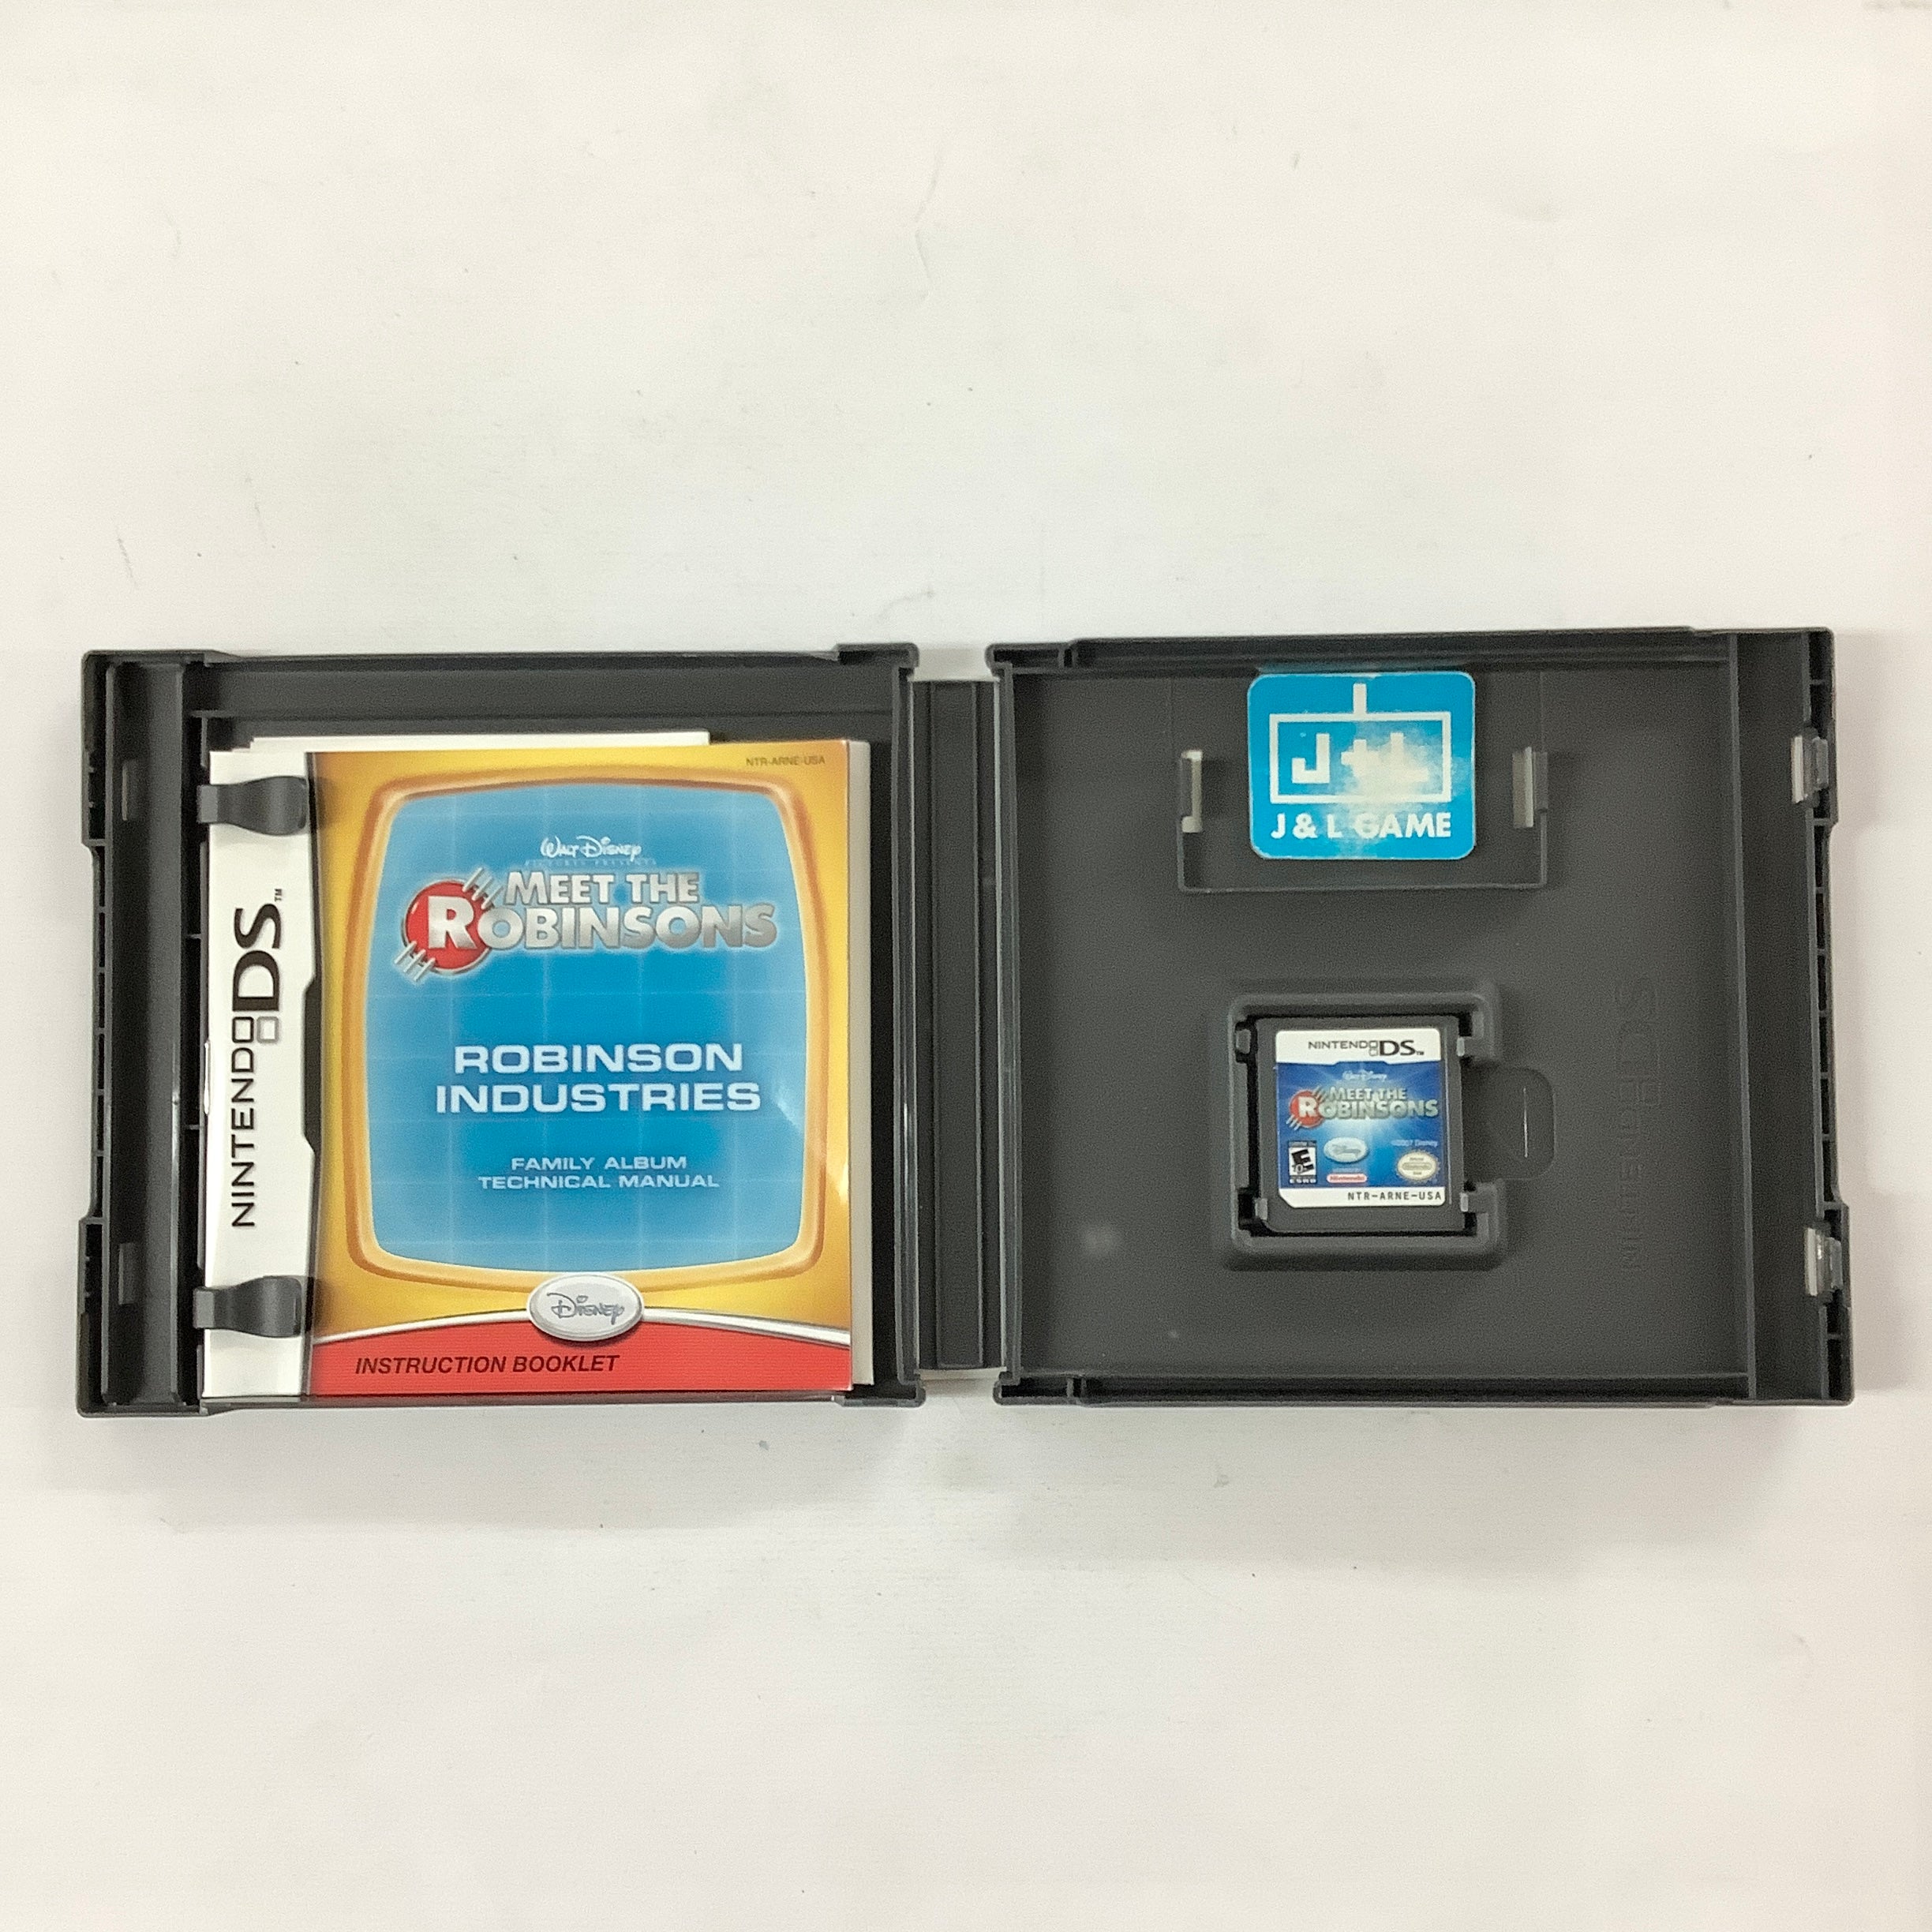 Disney's Meet the Robinsons - (NDS) Nintendo DS [Pre-Owned] Video Games Disney Interactive Studios   